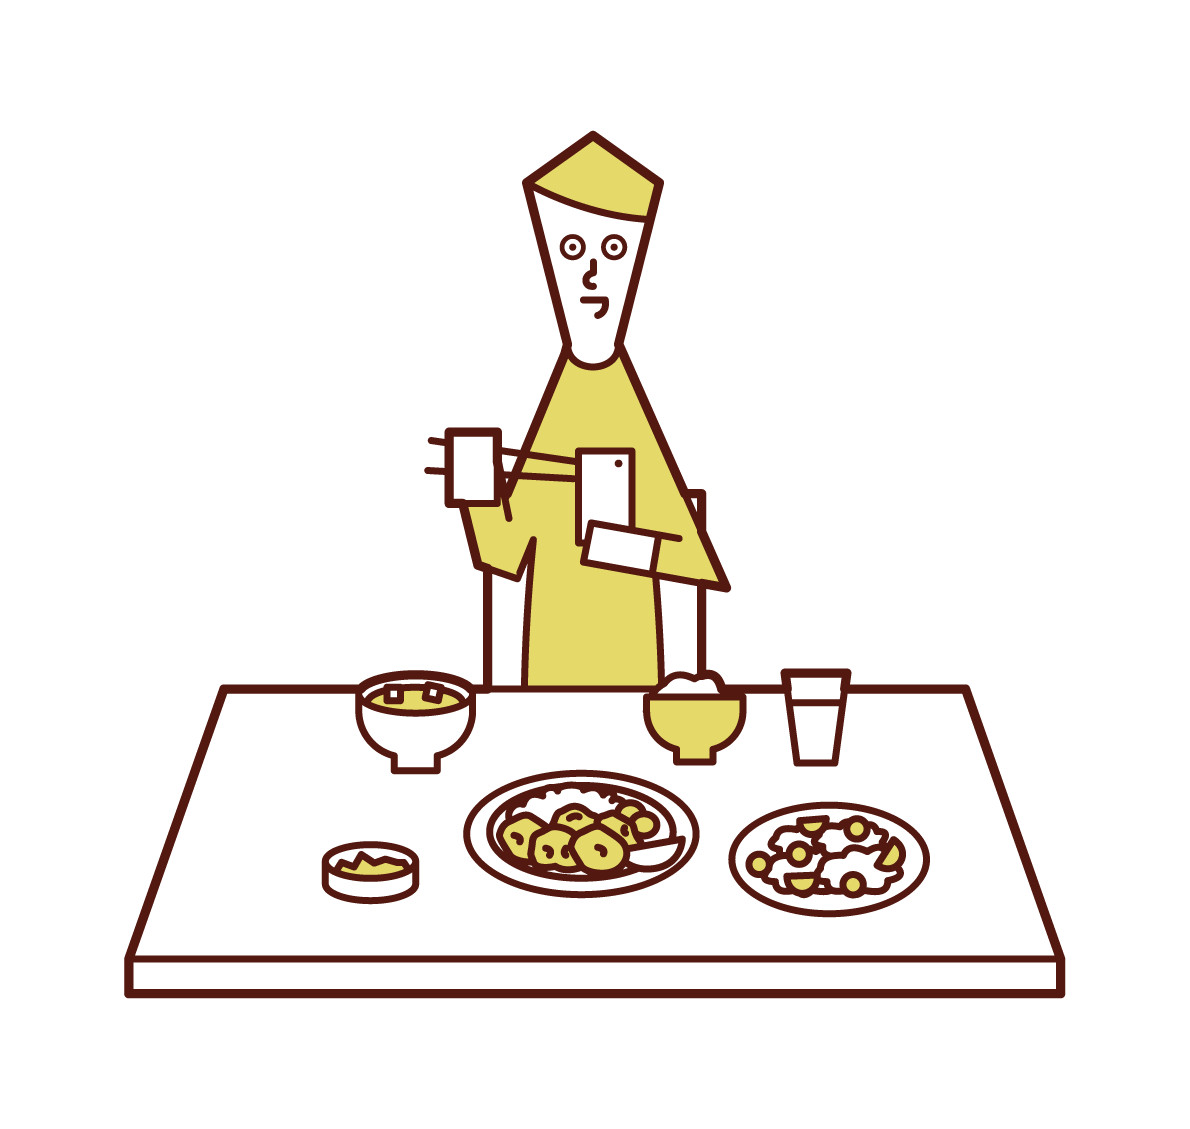 Illustration of a man who uses a smartphone during a meal